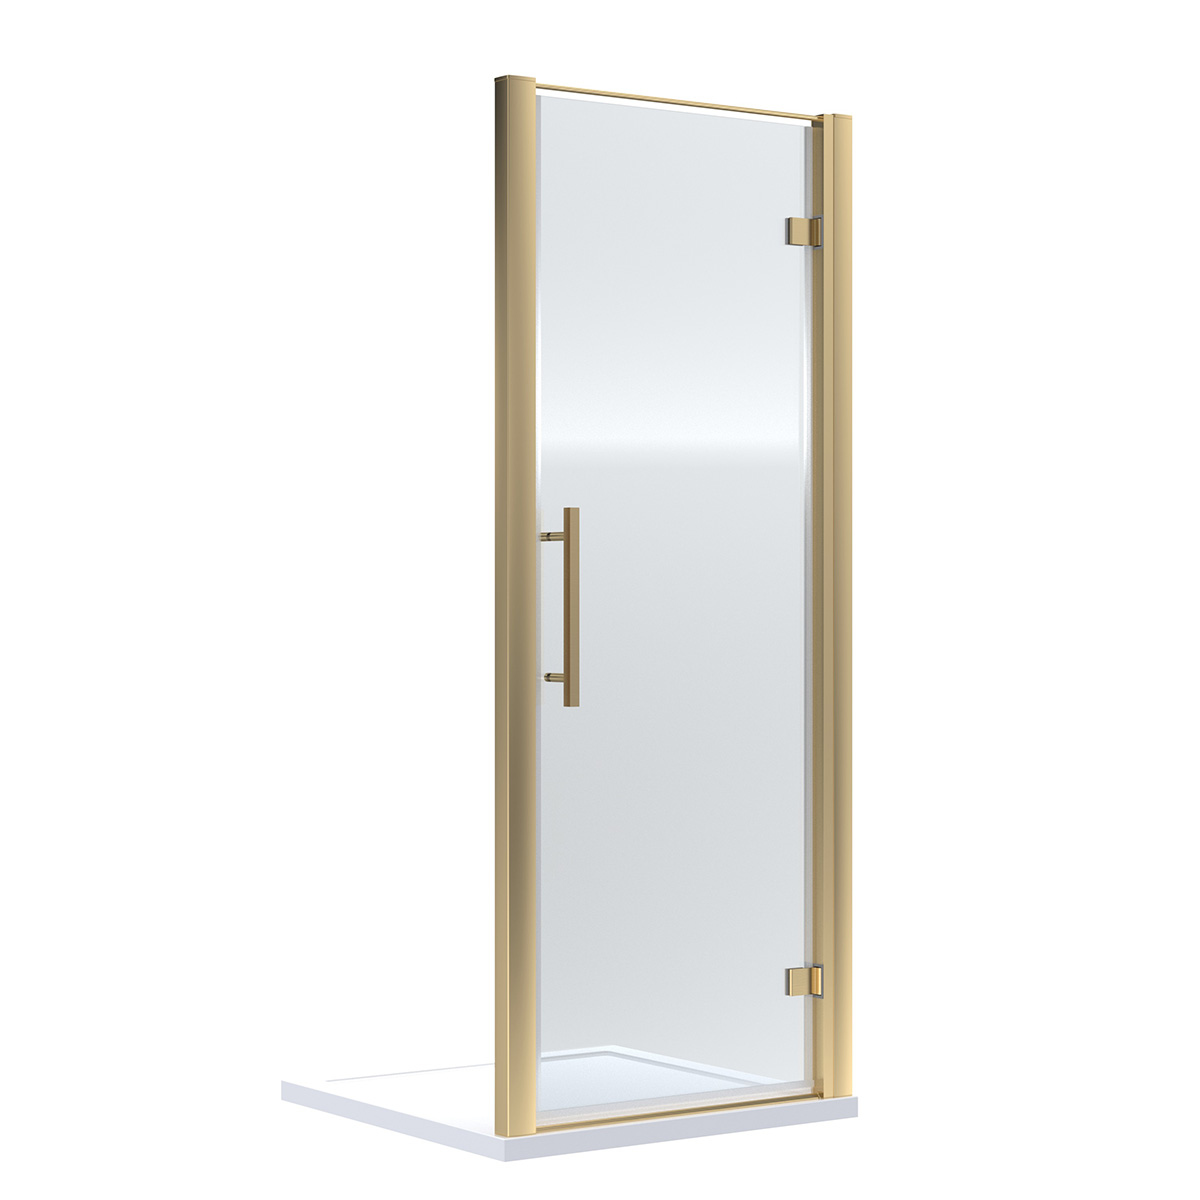 Hudson Reed 900mm Hinged Shower Door with Square Handle - Brushed Brass